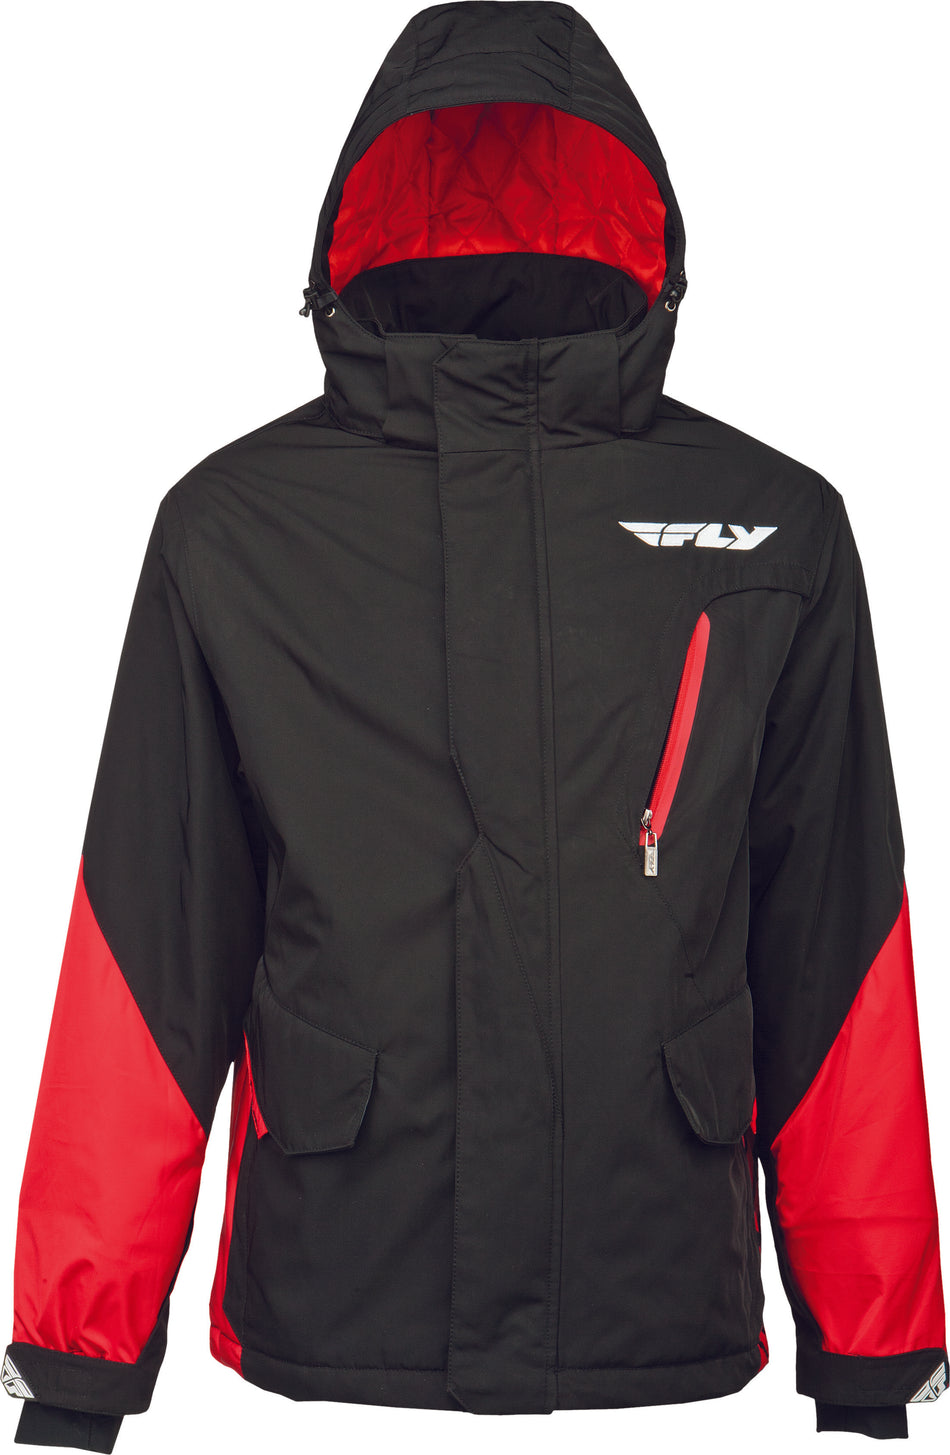 FLY RACING Factory Jacket Red/Black 2x 354-61622X